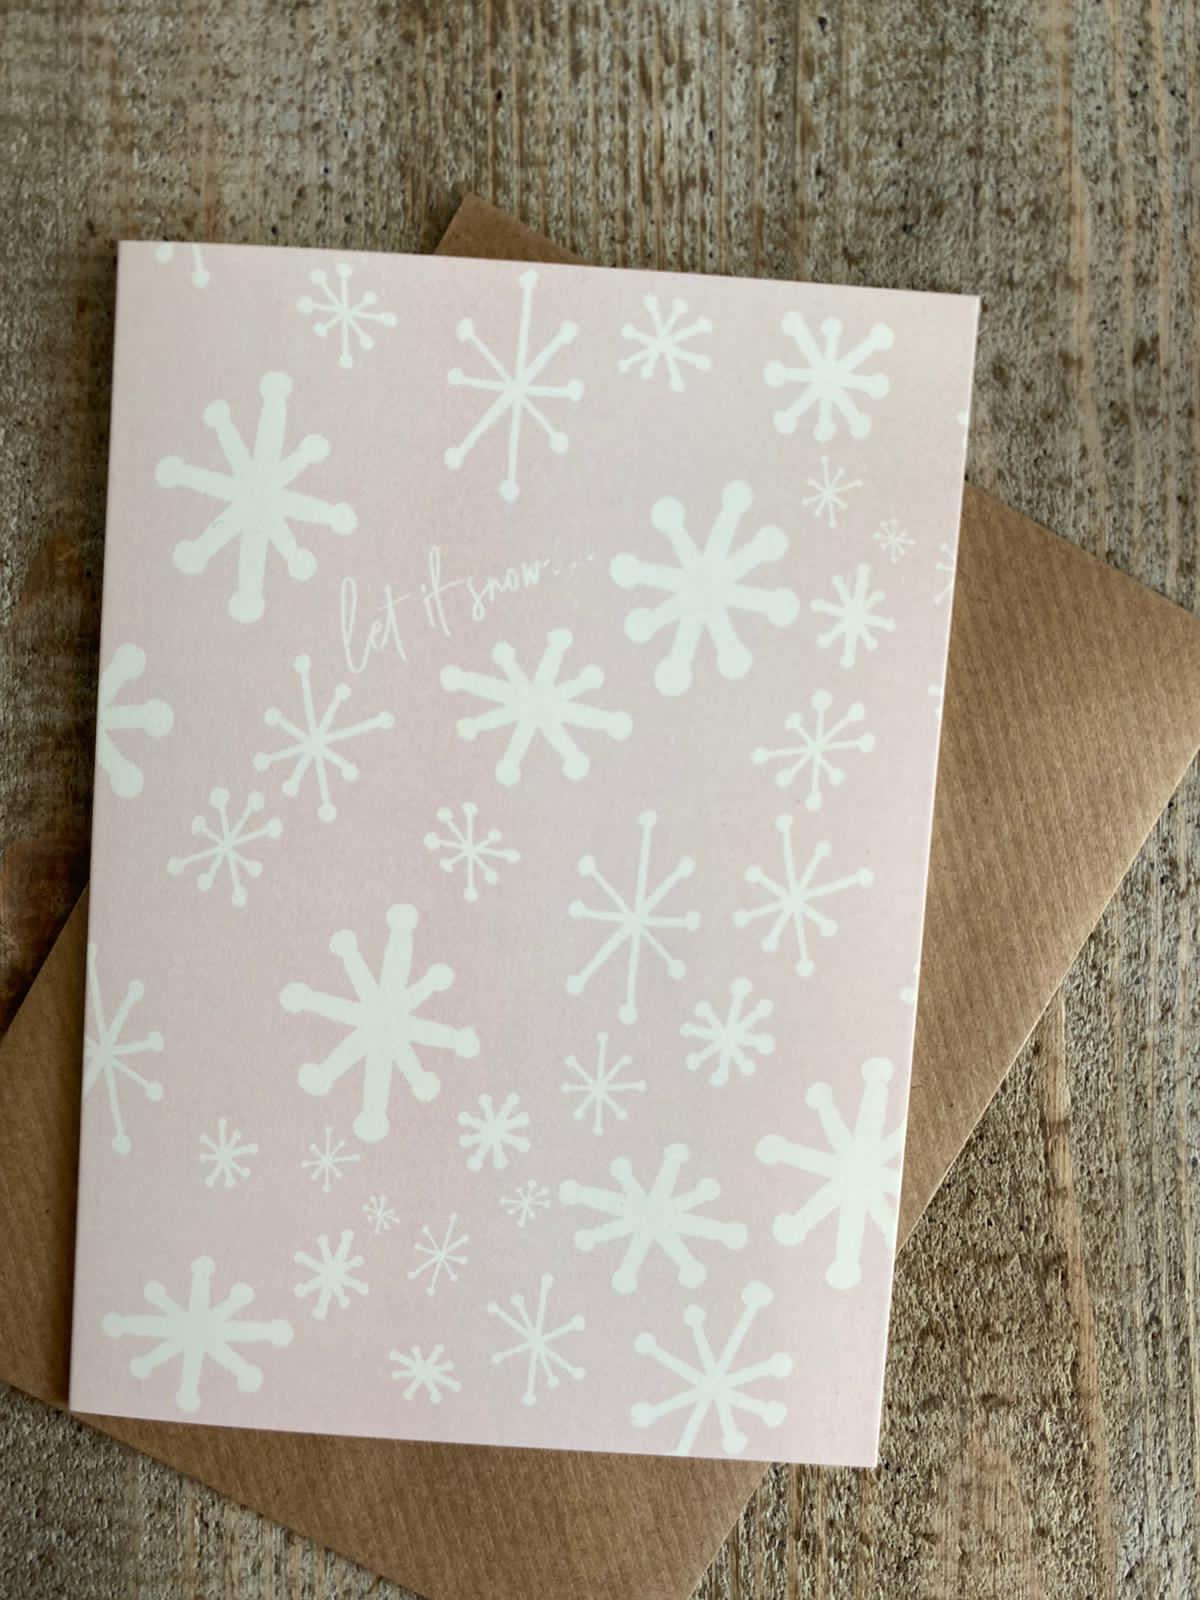 *Sands Christmas ‘Let it Snow’ Card designed by our own Stormiehud